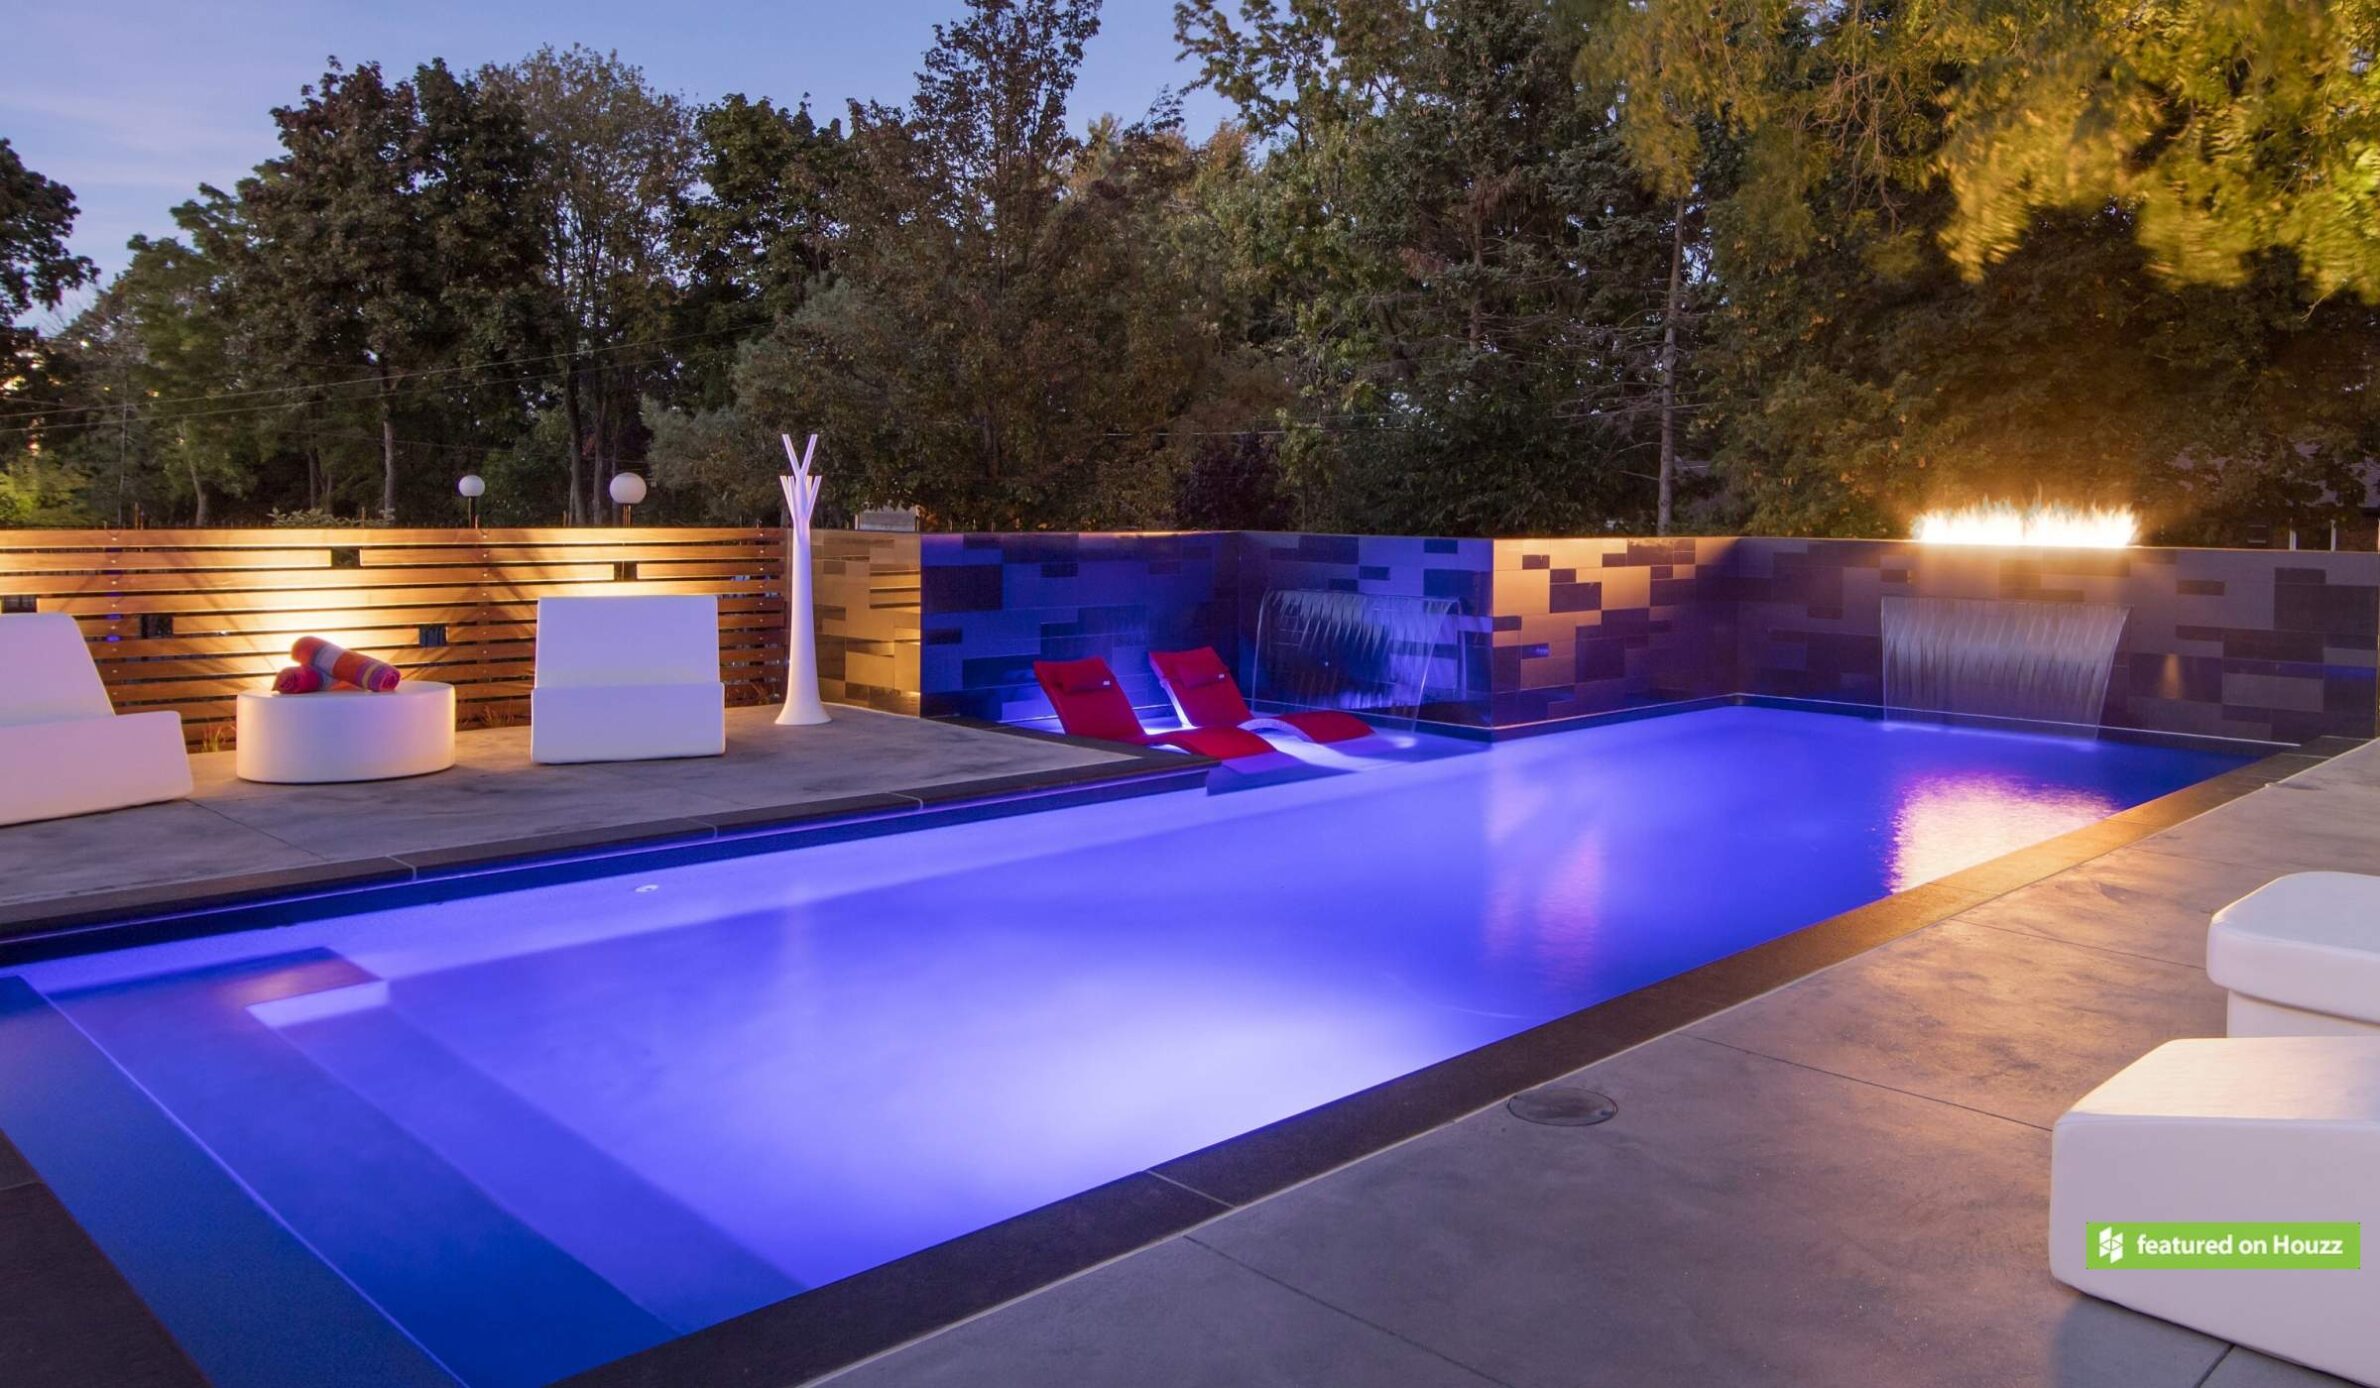 A modern outdoor swimming pool with blue lighting at dusk, featuring loungers, a waterfall, and a stylish seating area with wooden fencing.